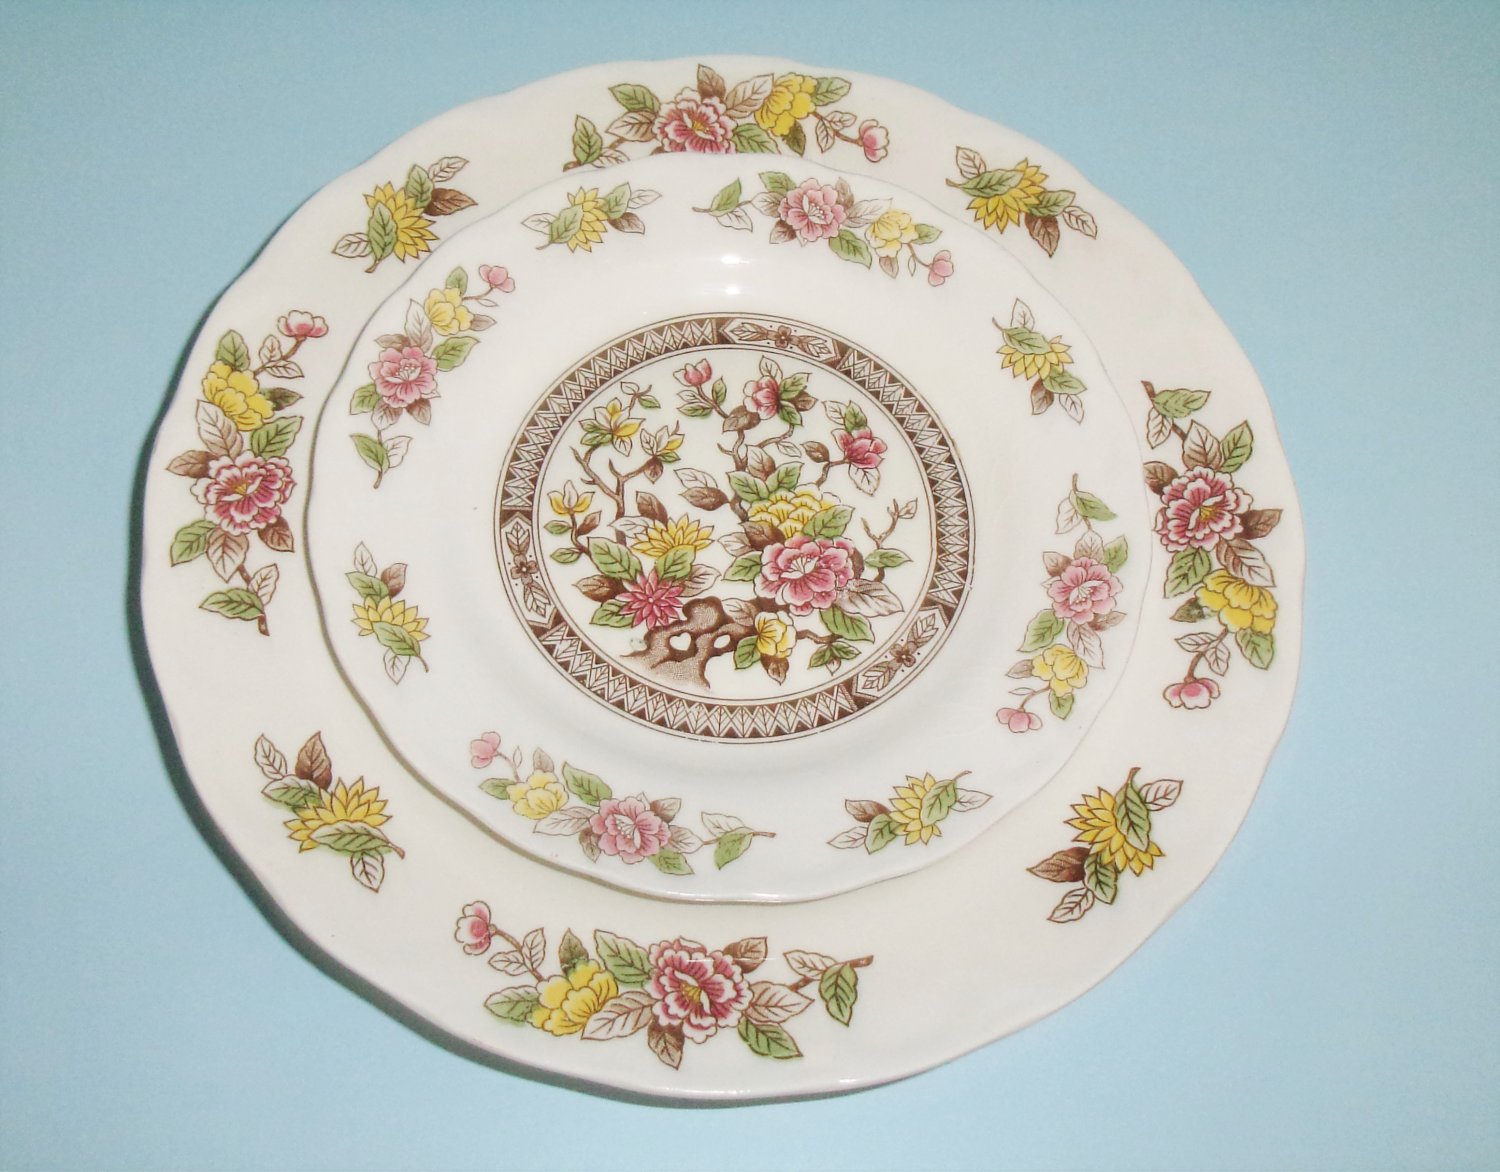 Indian Tree 3 Dinner Plates and 1 Salad Plate Vintage Made By Style House Japan